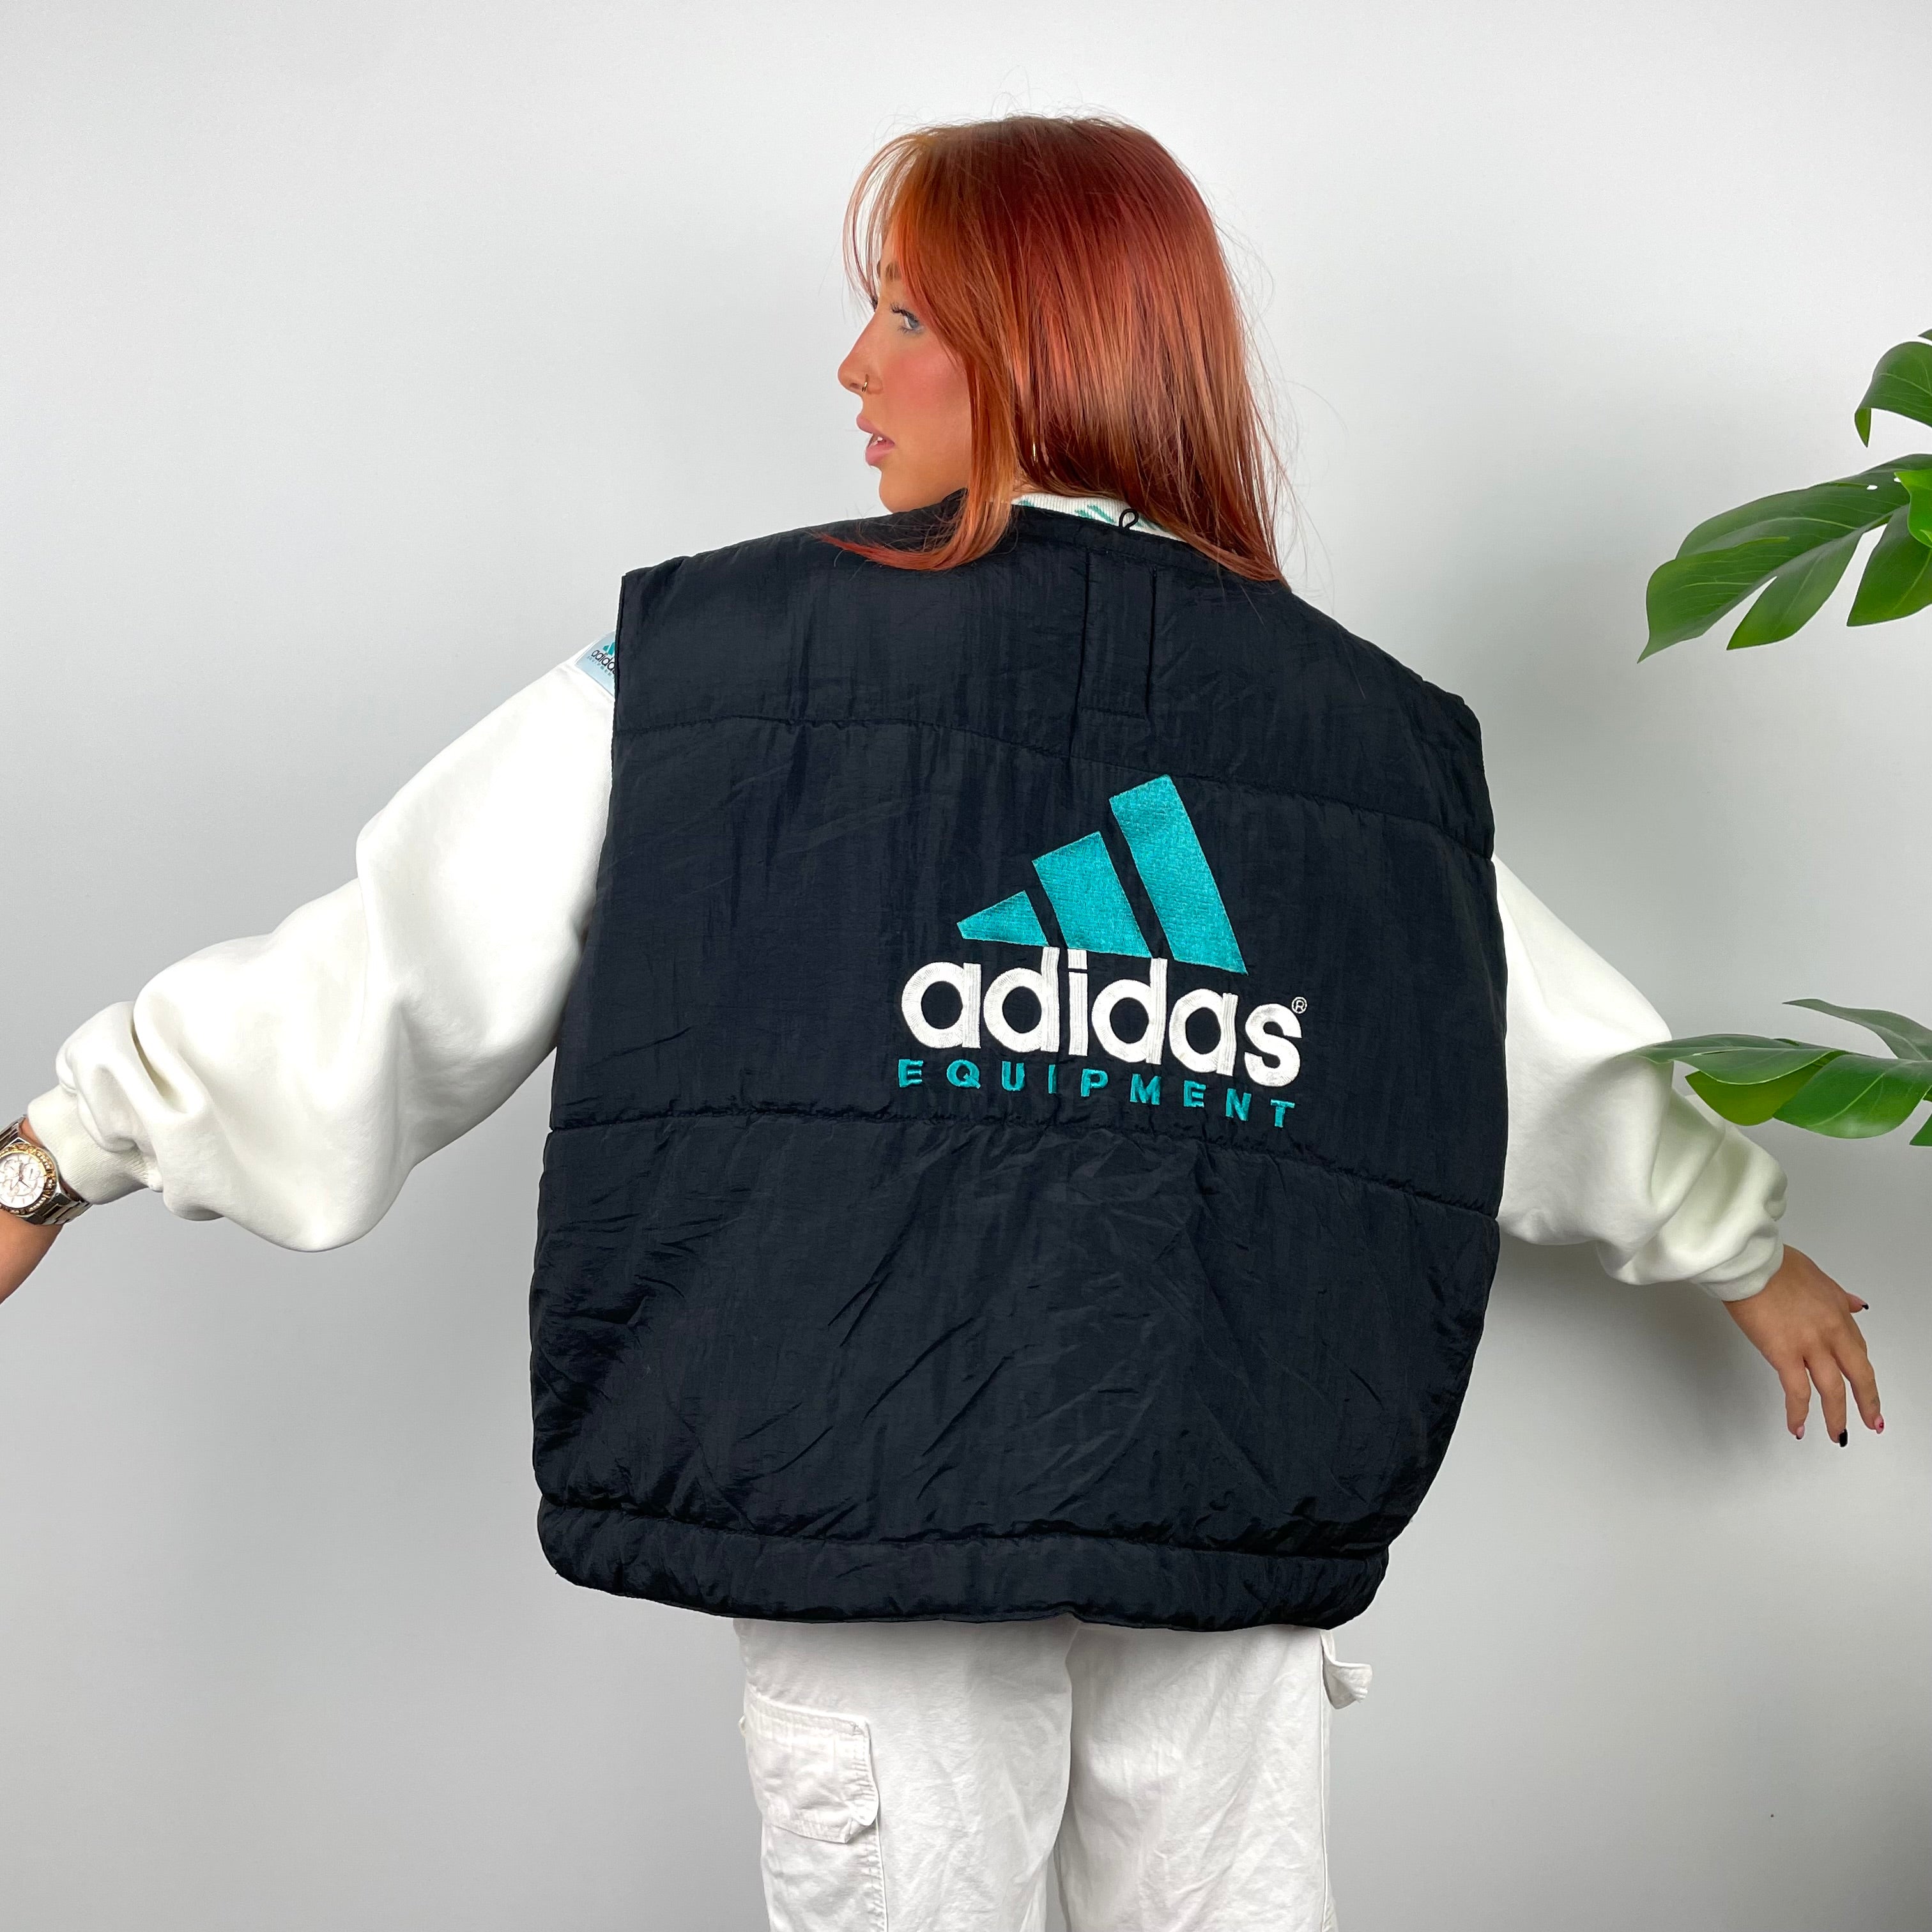 Adidas Equipment RARE Black Embroidered Spell Out Gilet (L)